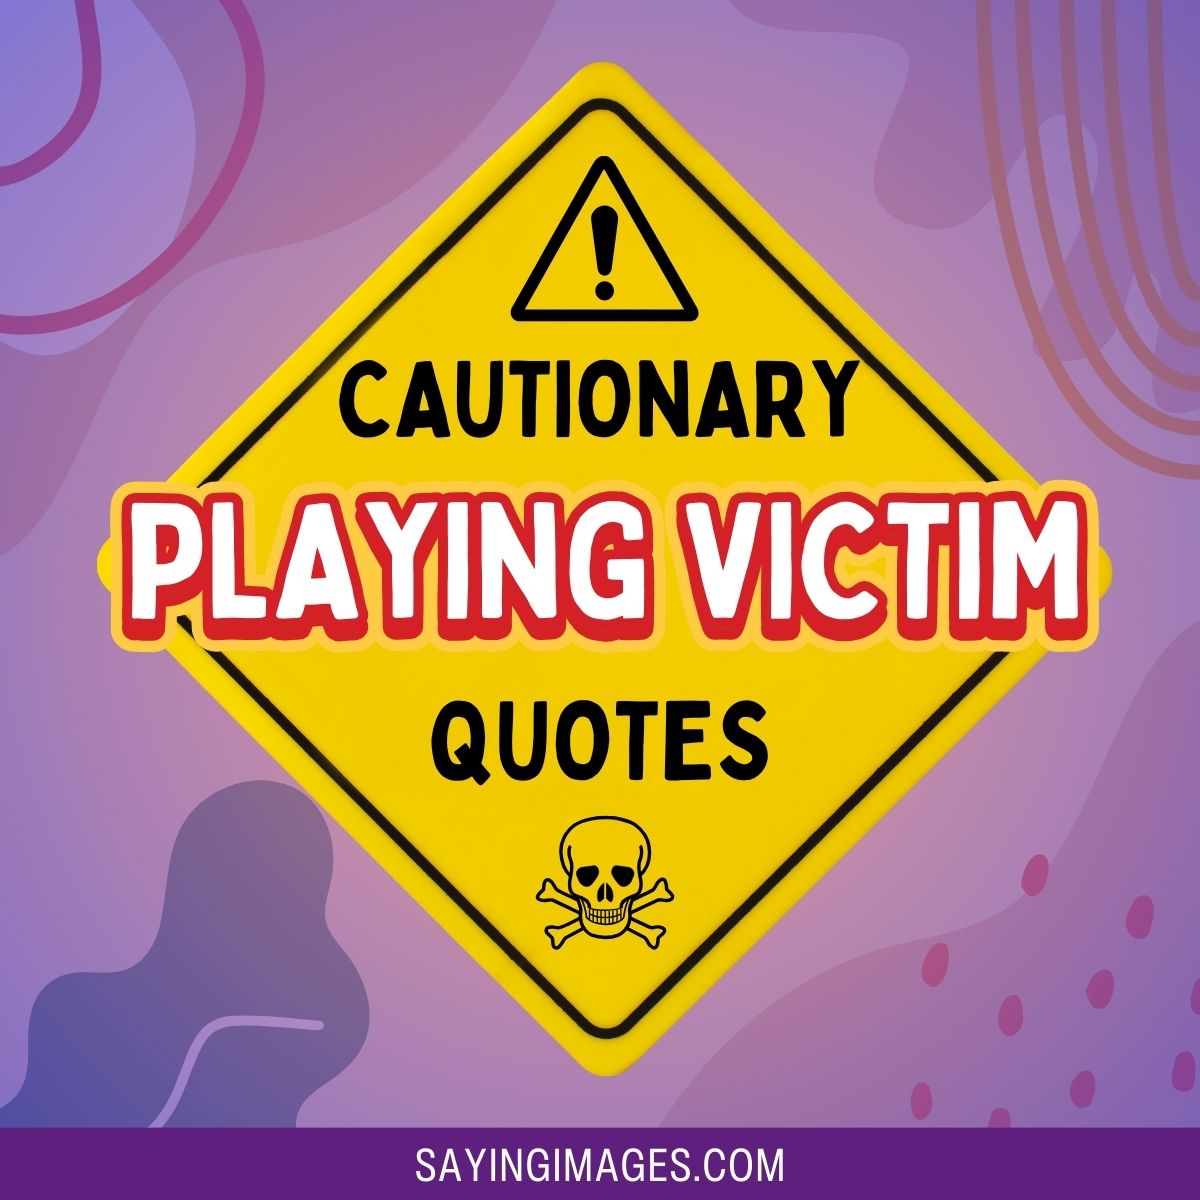 Cautionary Playing Victim Quotes